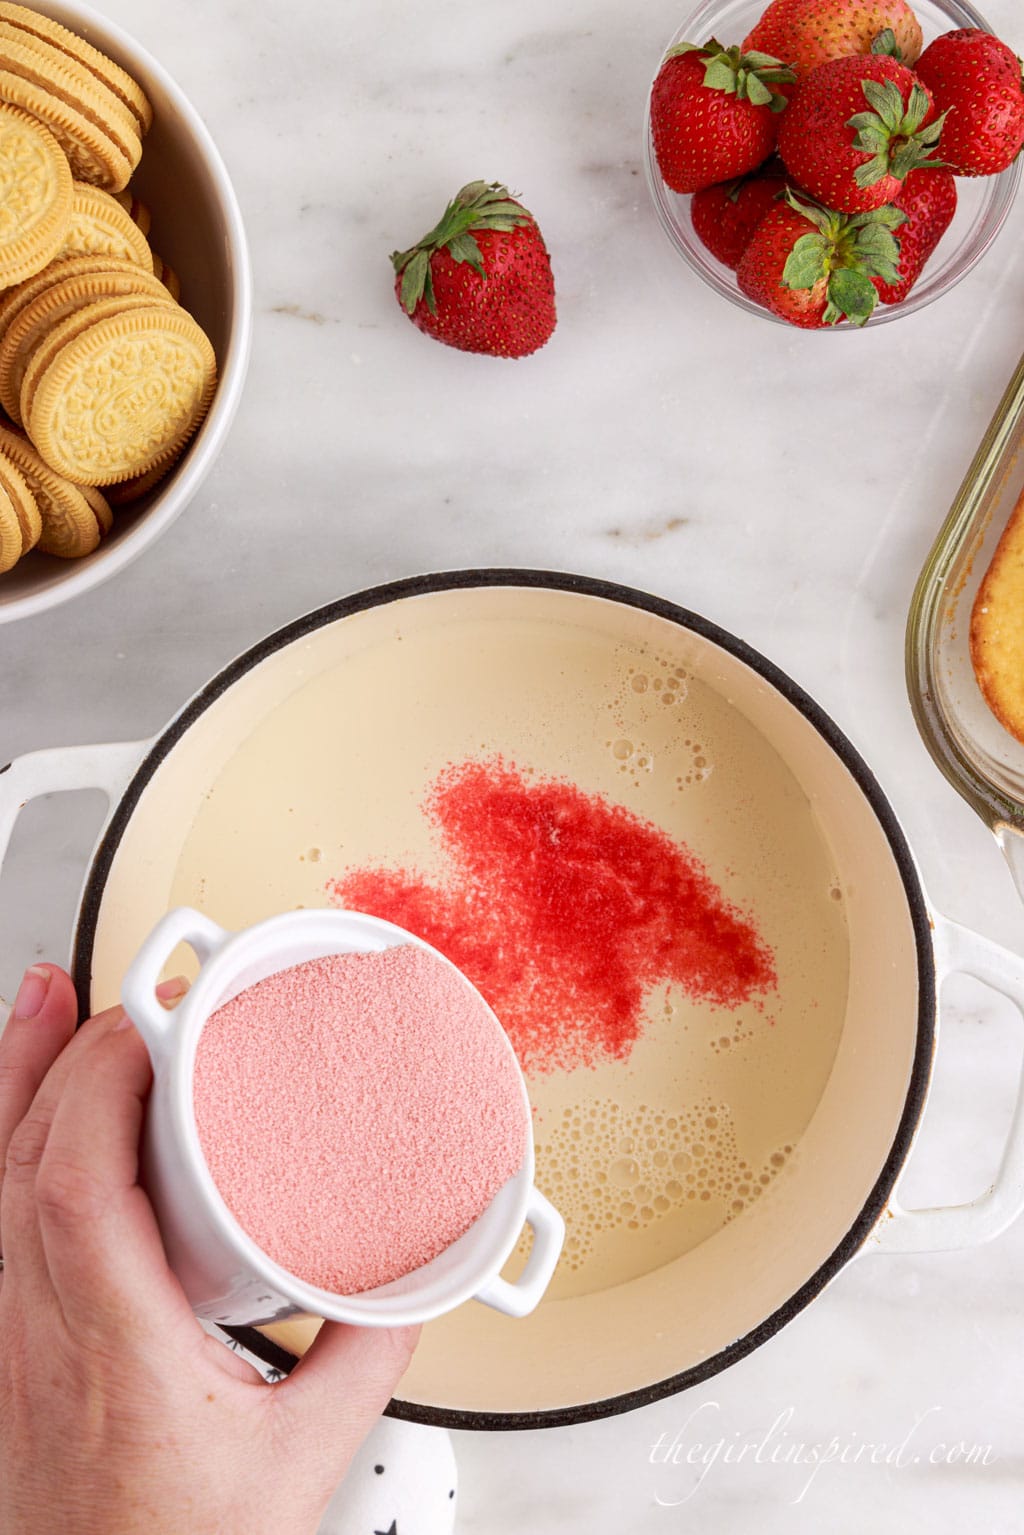 strawberry gelatin being sprinkled over the evaporated milk in a saucepan.